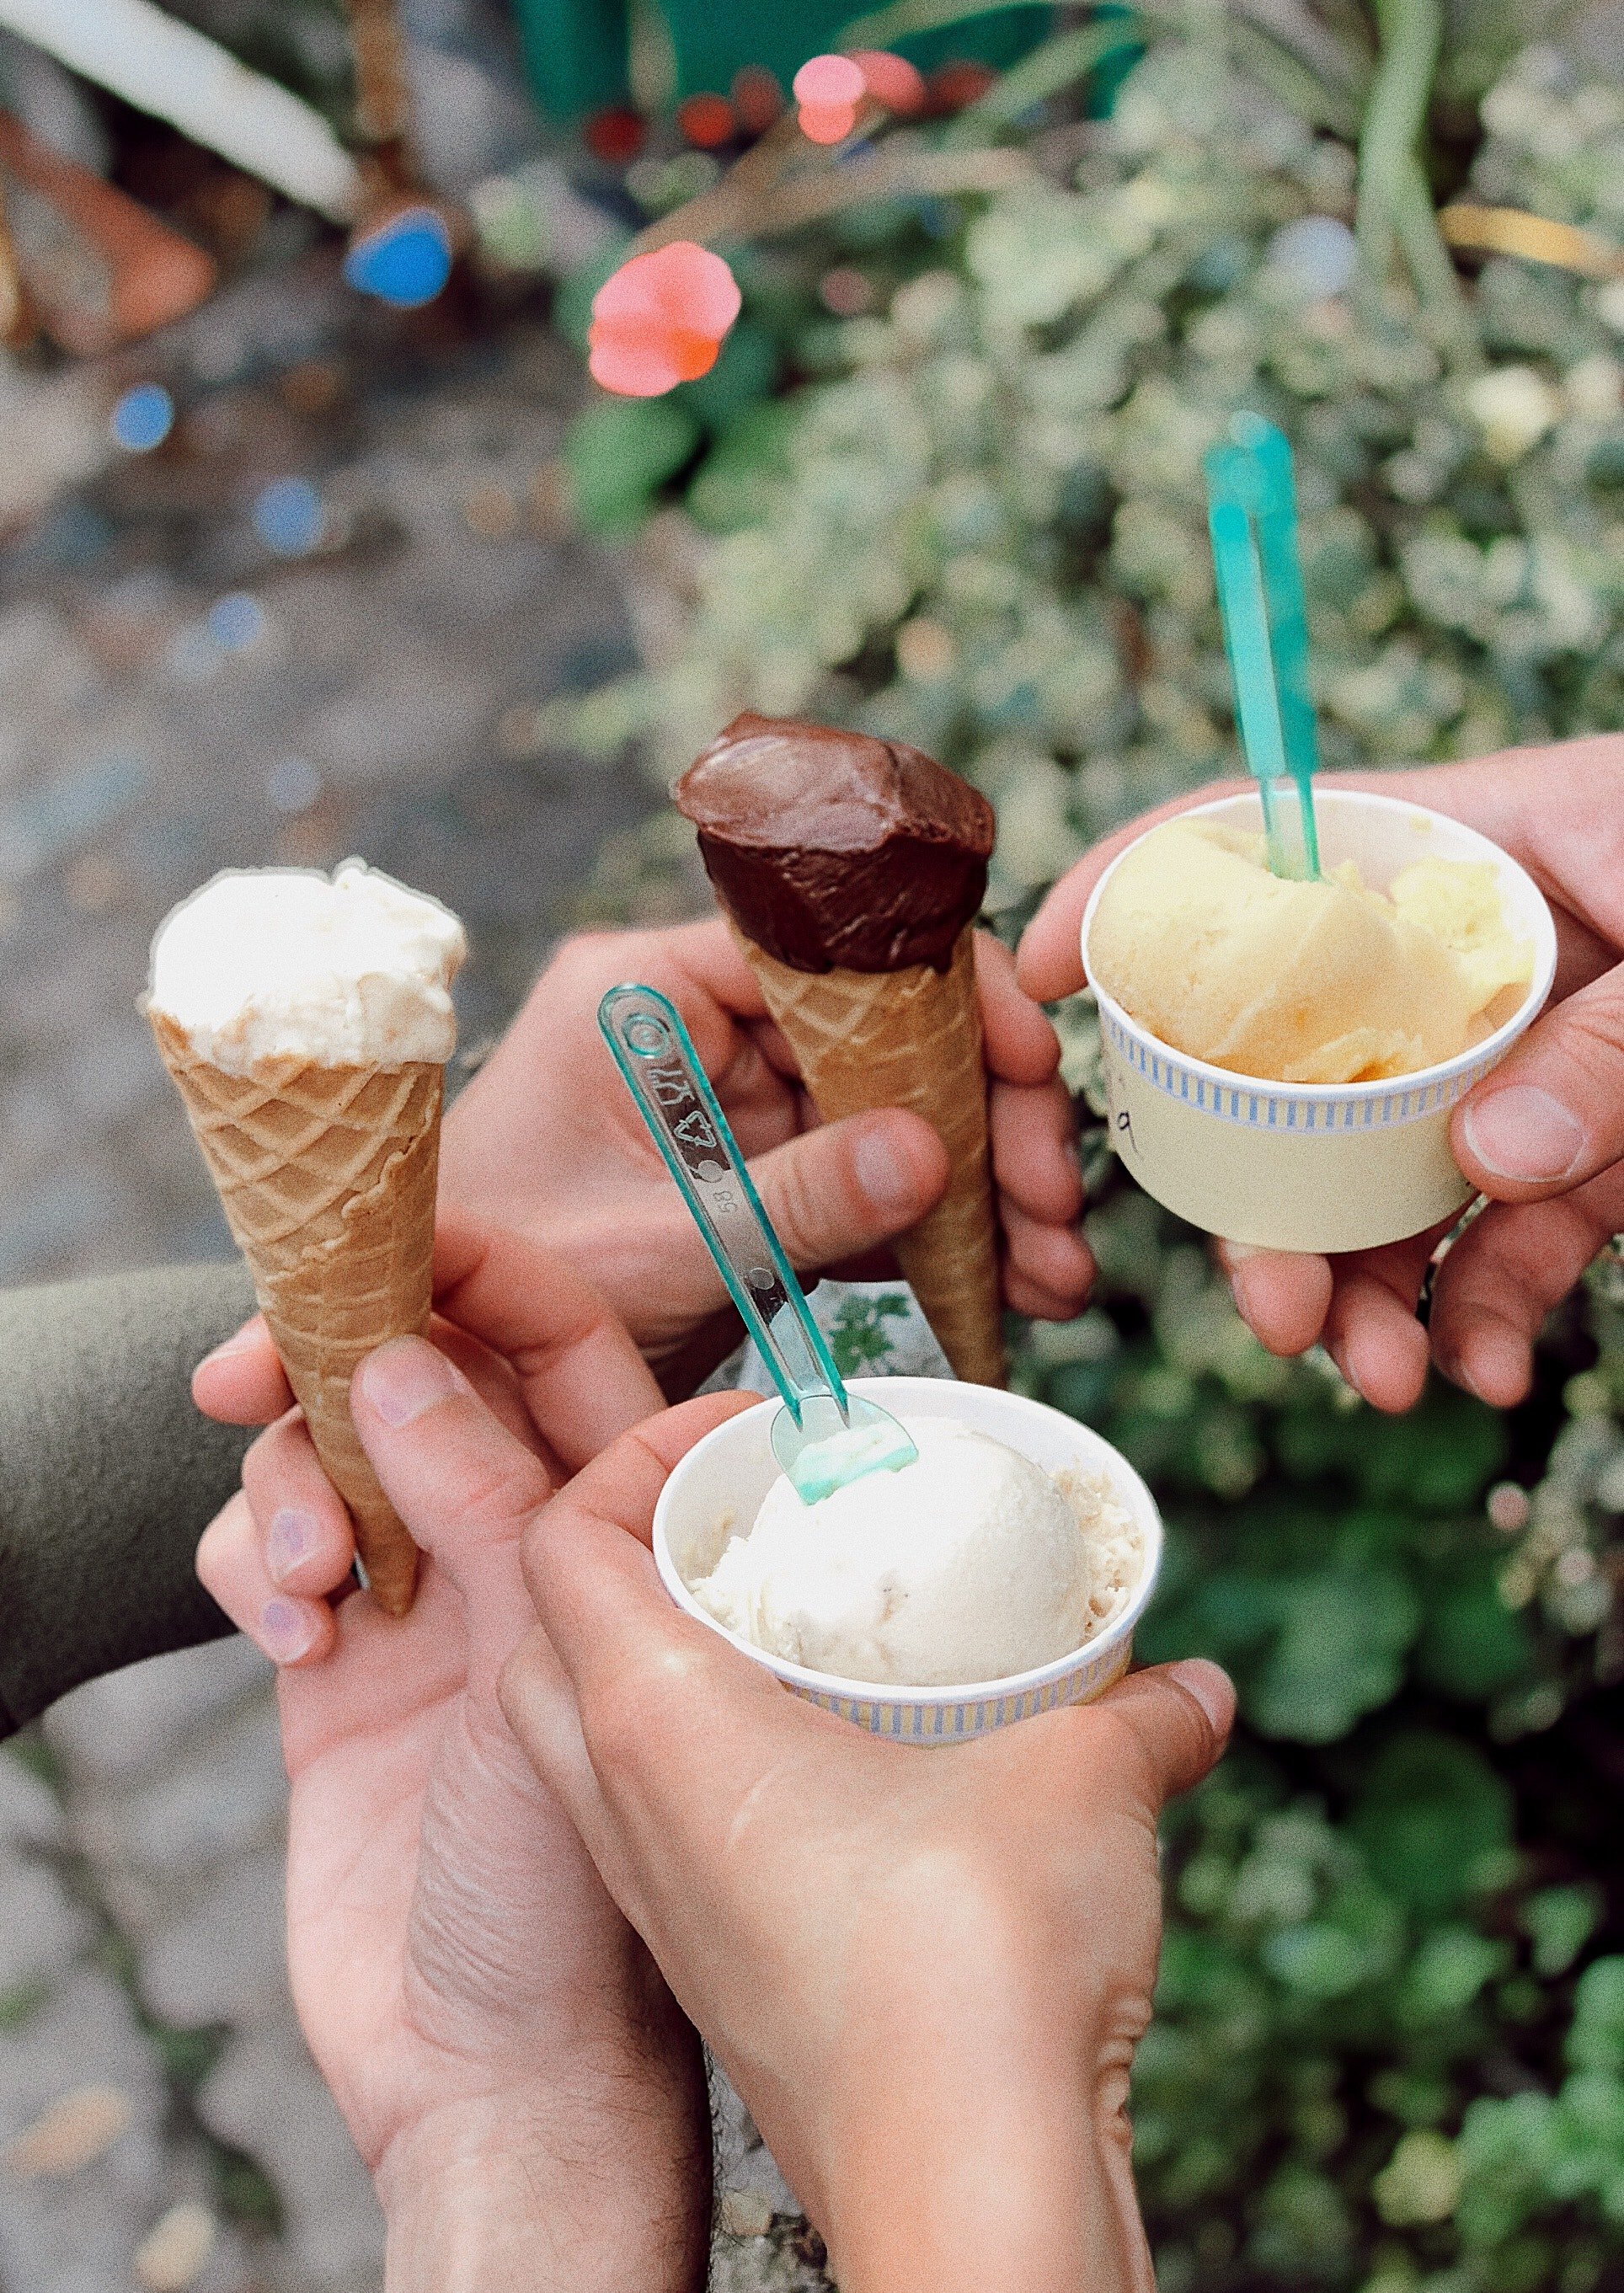 The group of boys devouring their ice creams mocked Peter. | Source: Pexels